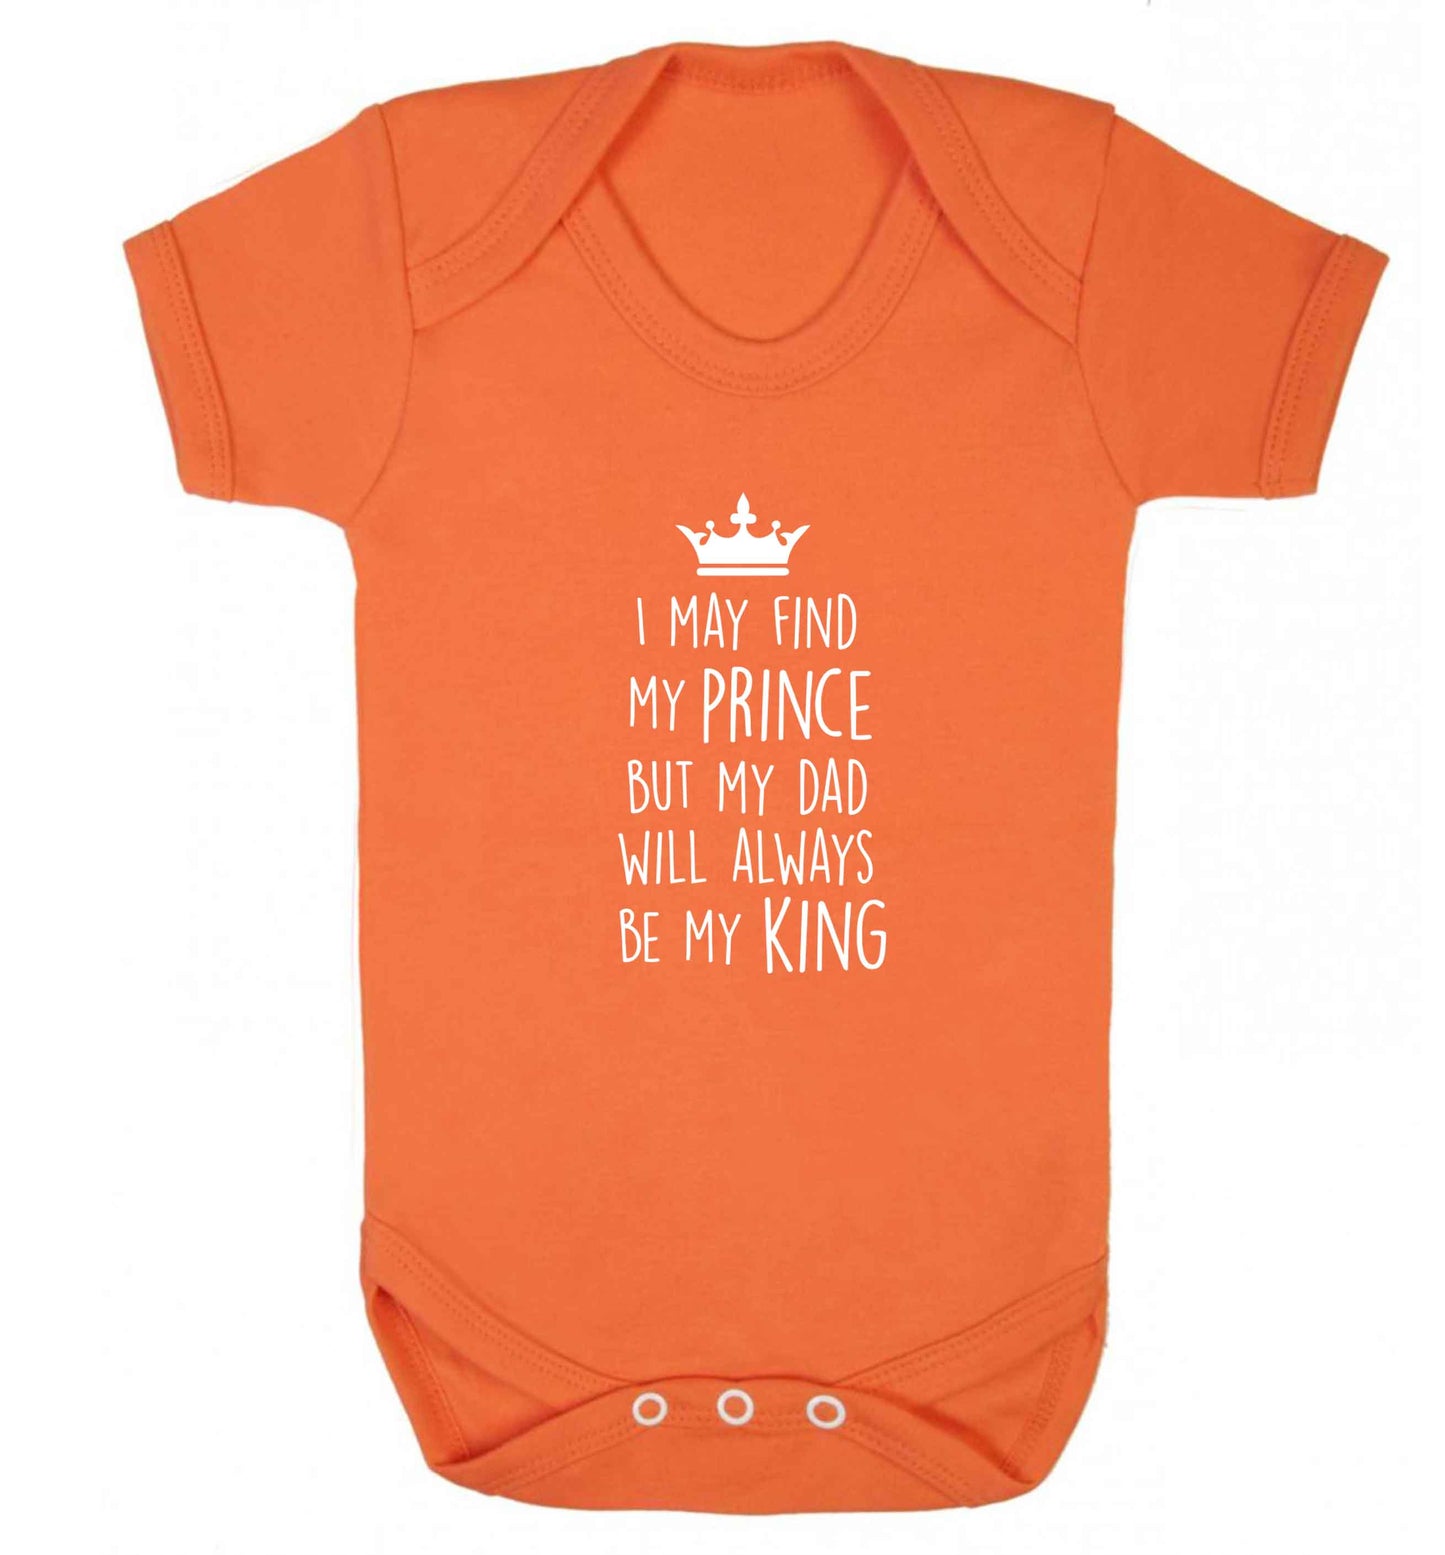 I may find my prince but my dad will always be my king baby vest orange 18-24 months